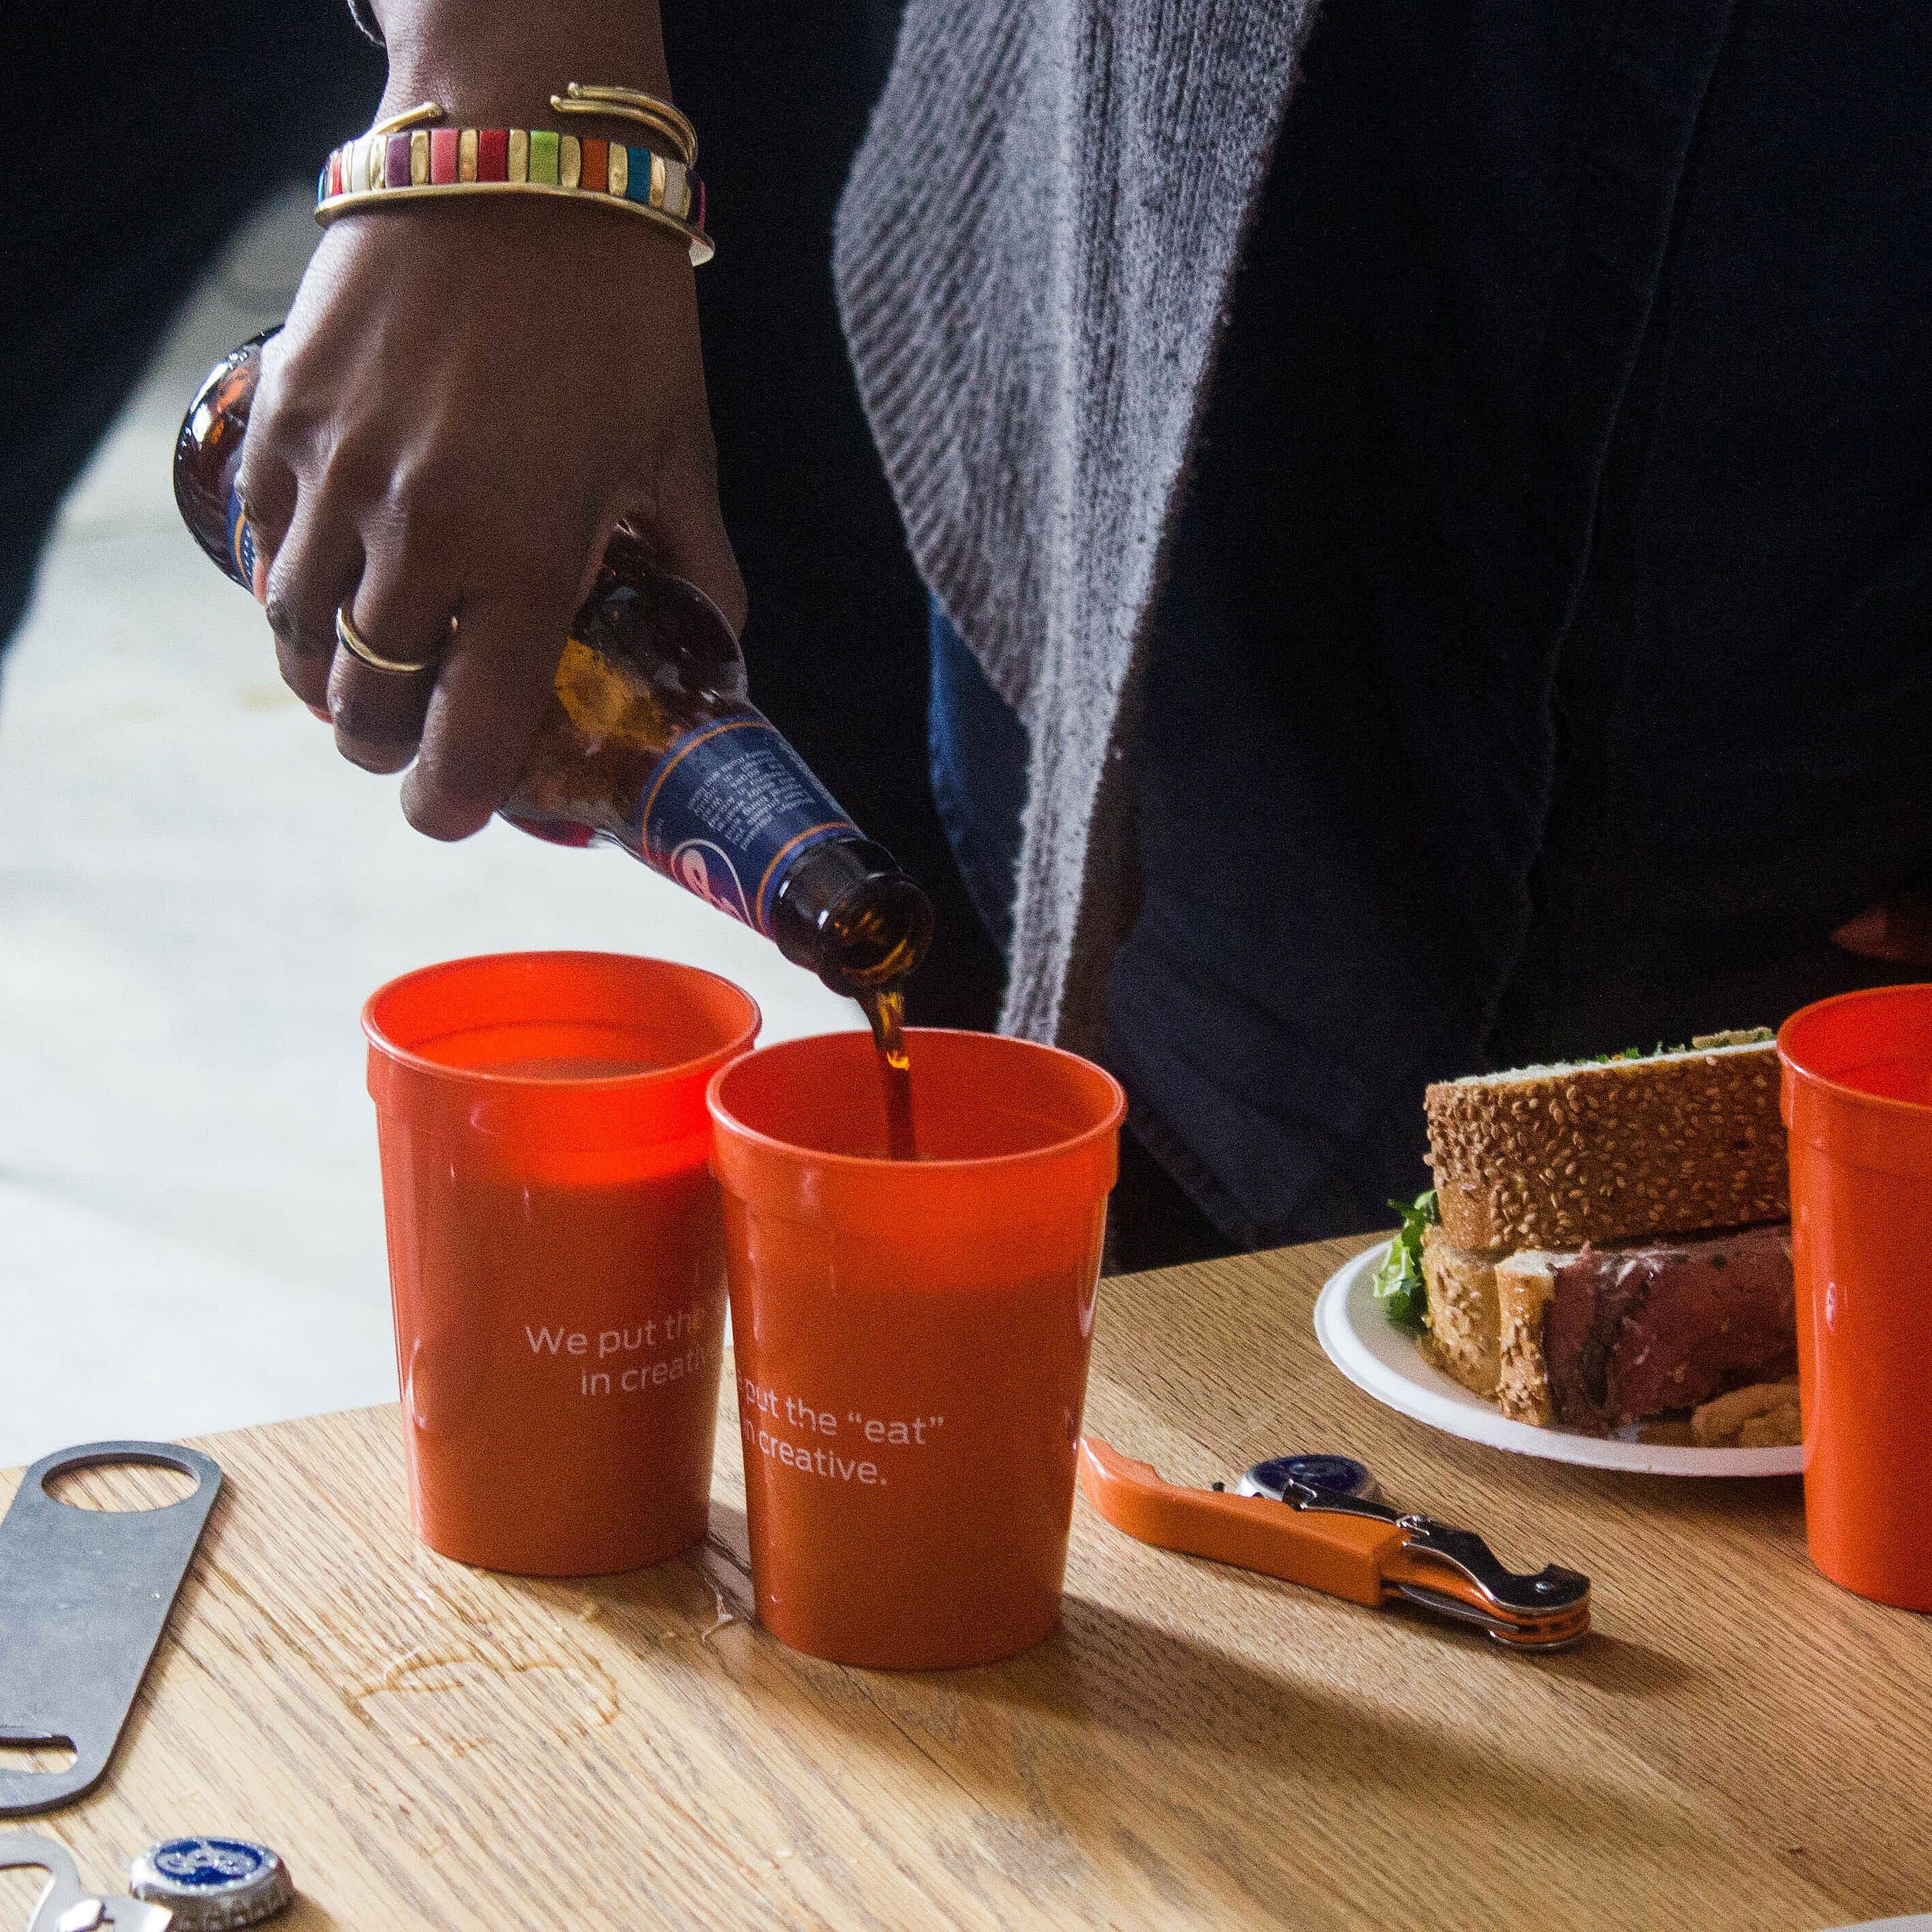 A person is pouring a dark beverage from a bottle into one of three orange cups on a wooden table. The table also has a plate with food, a bottle opener, and metal utensils. The cups have white text and the Lunch Talks logo.